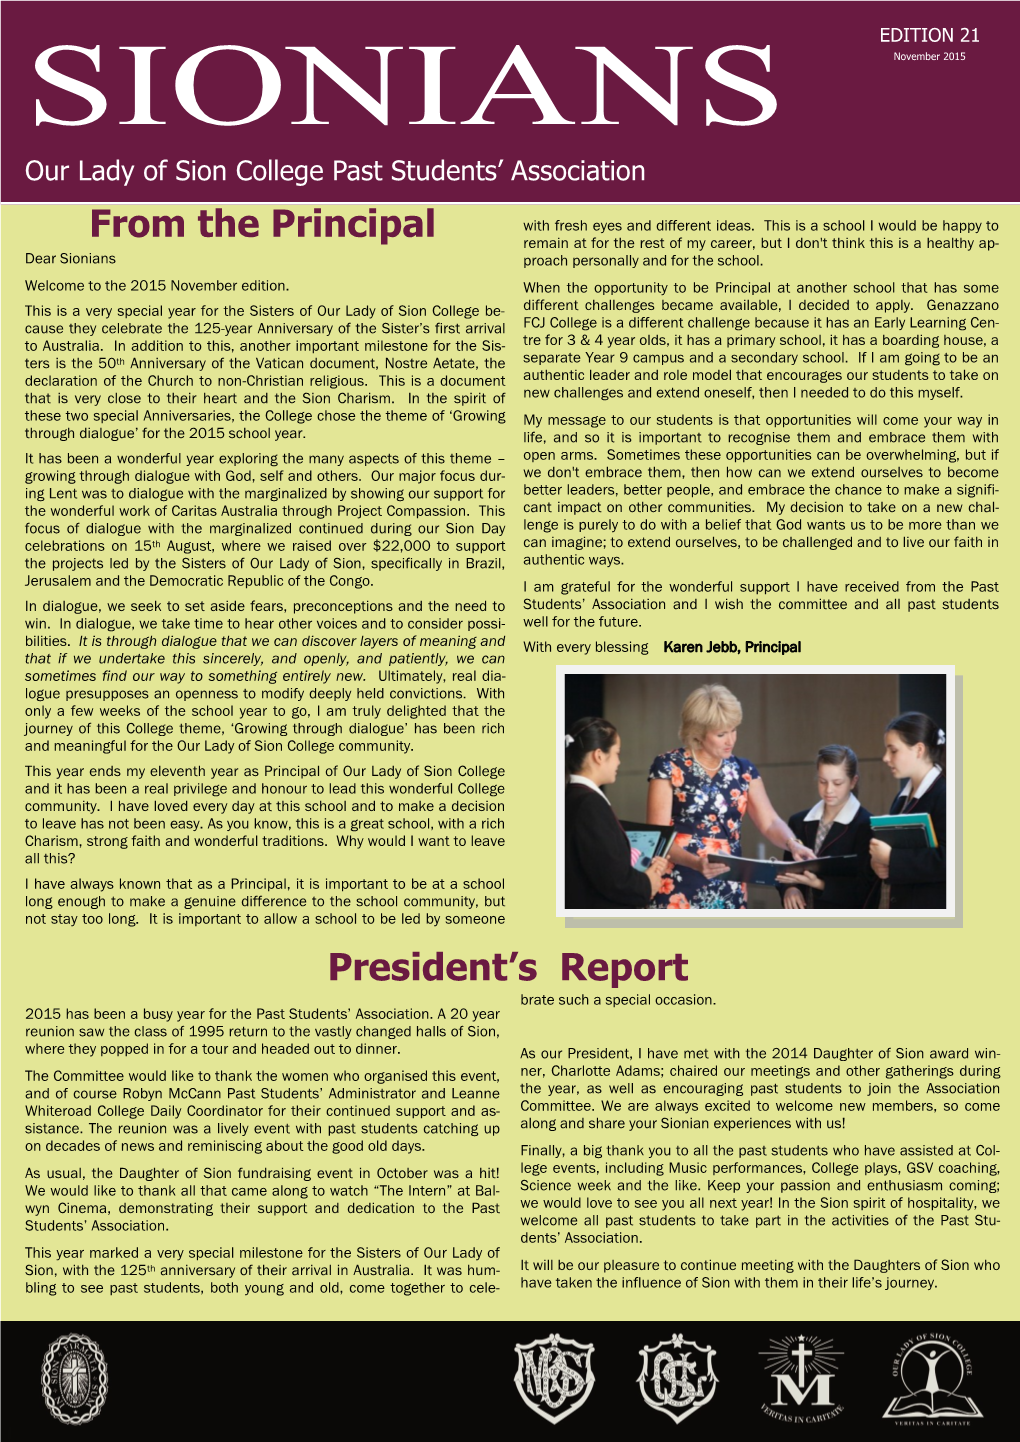 President's Report from the Principal